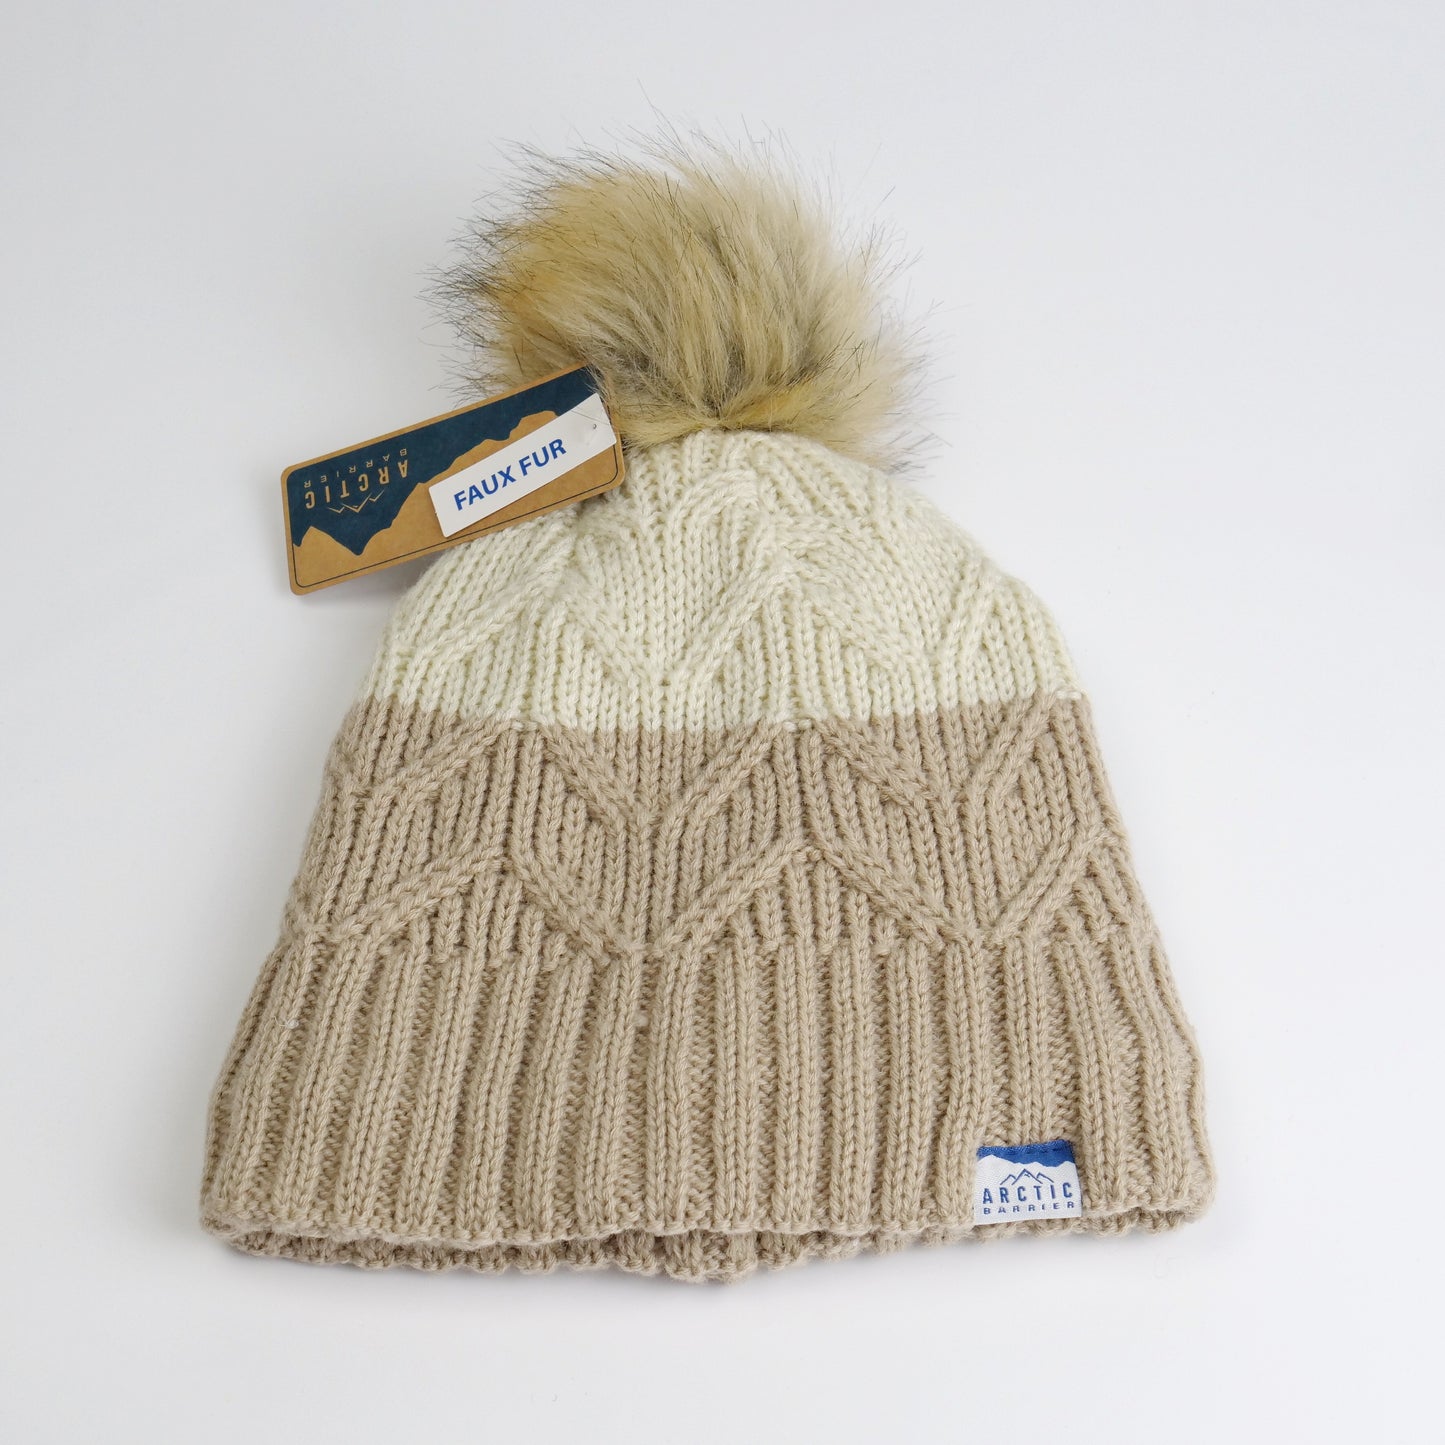 Women 2-Tone Cable Knit Beanie